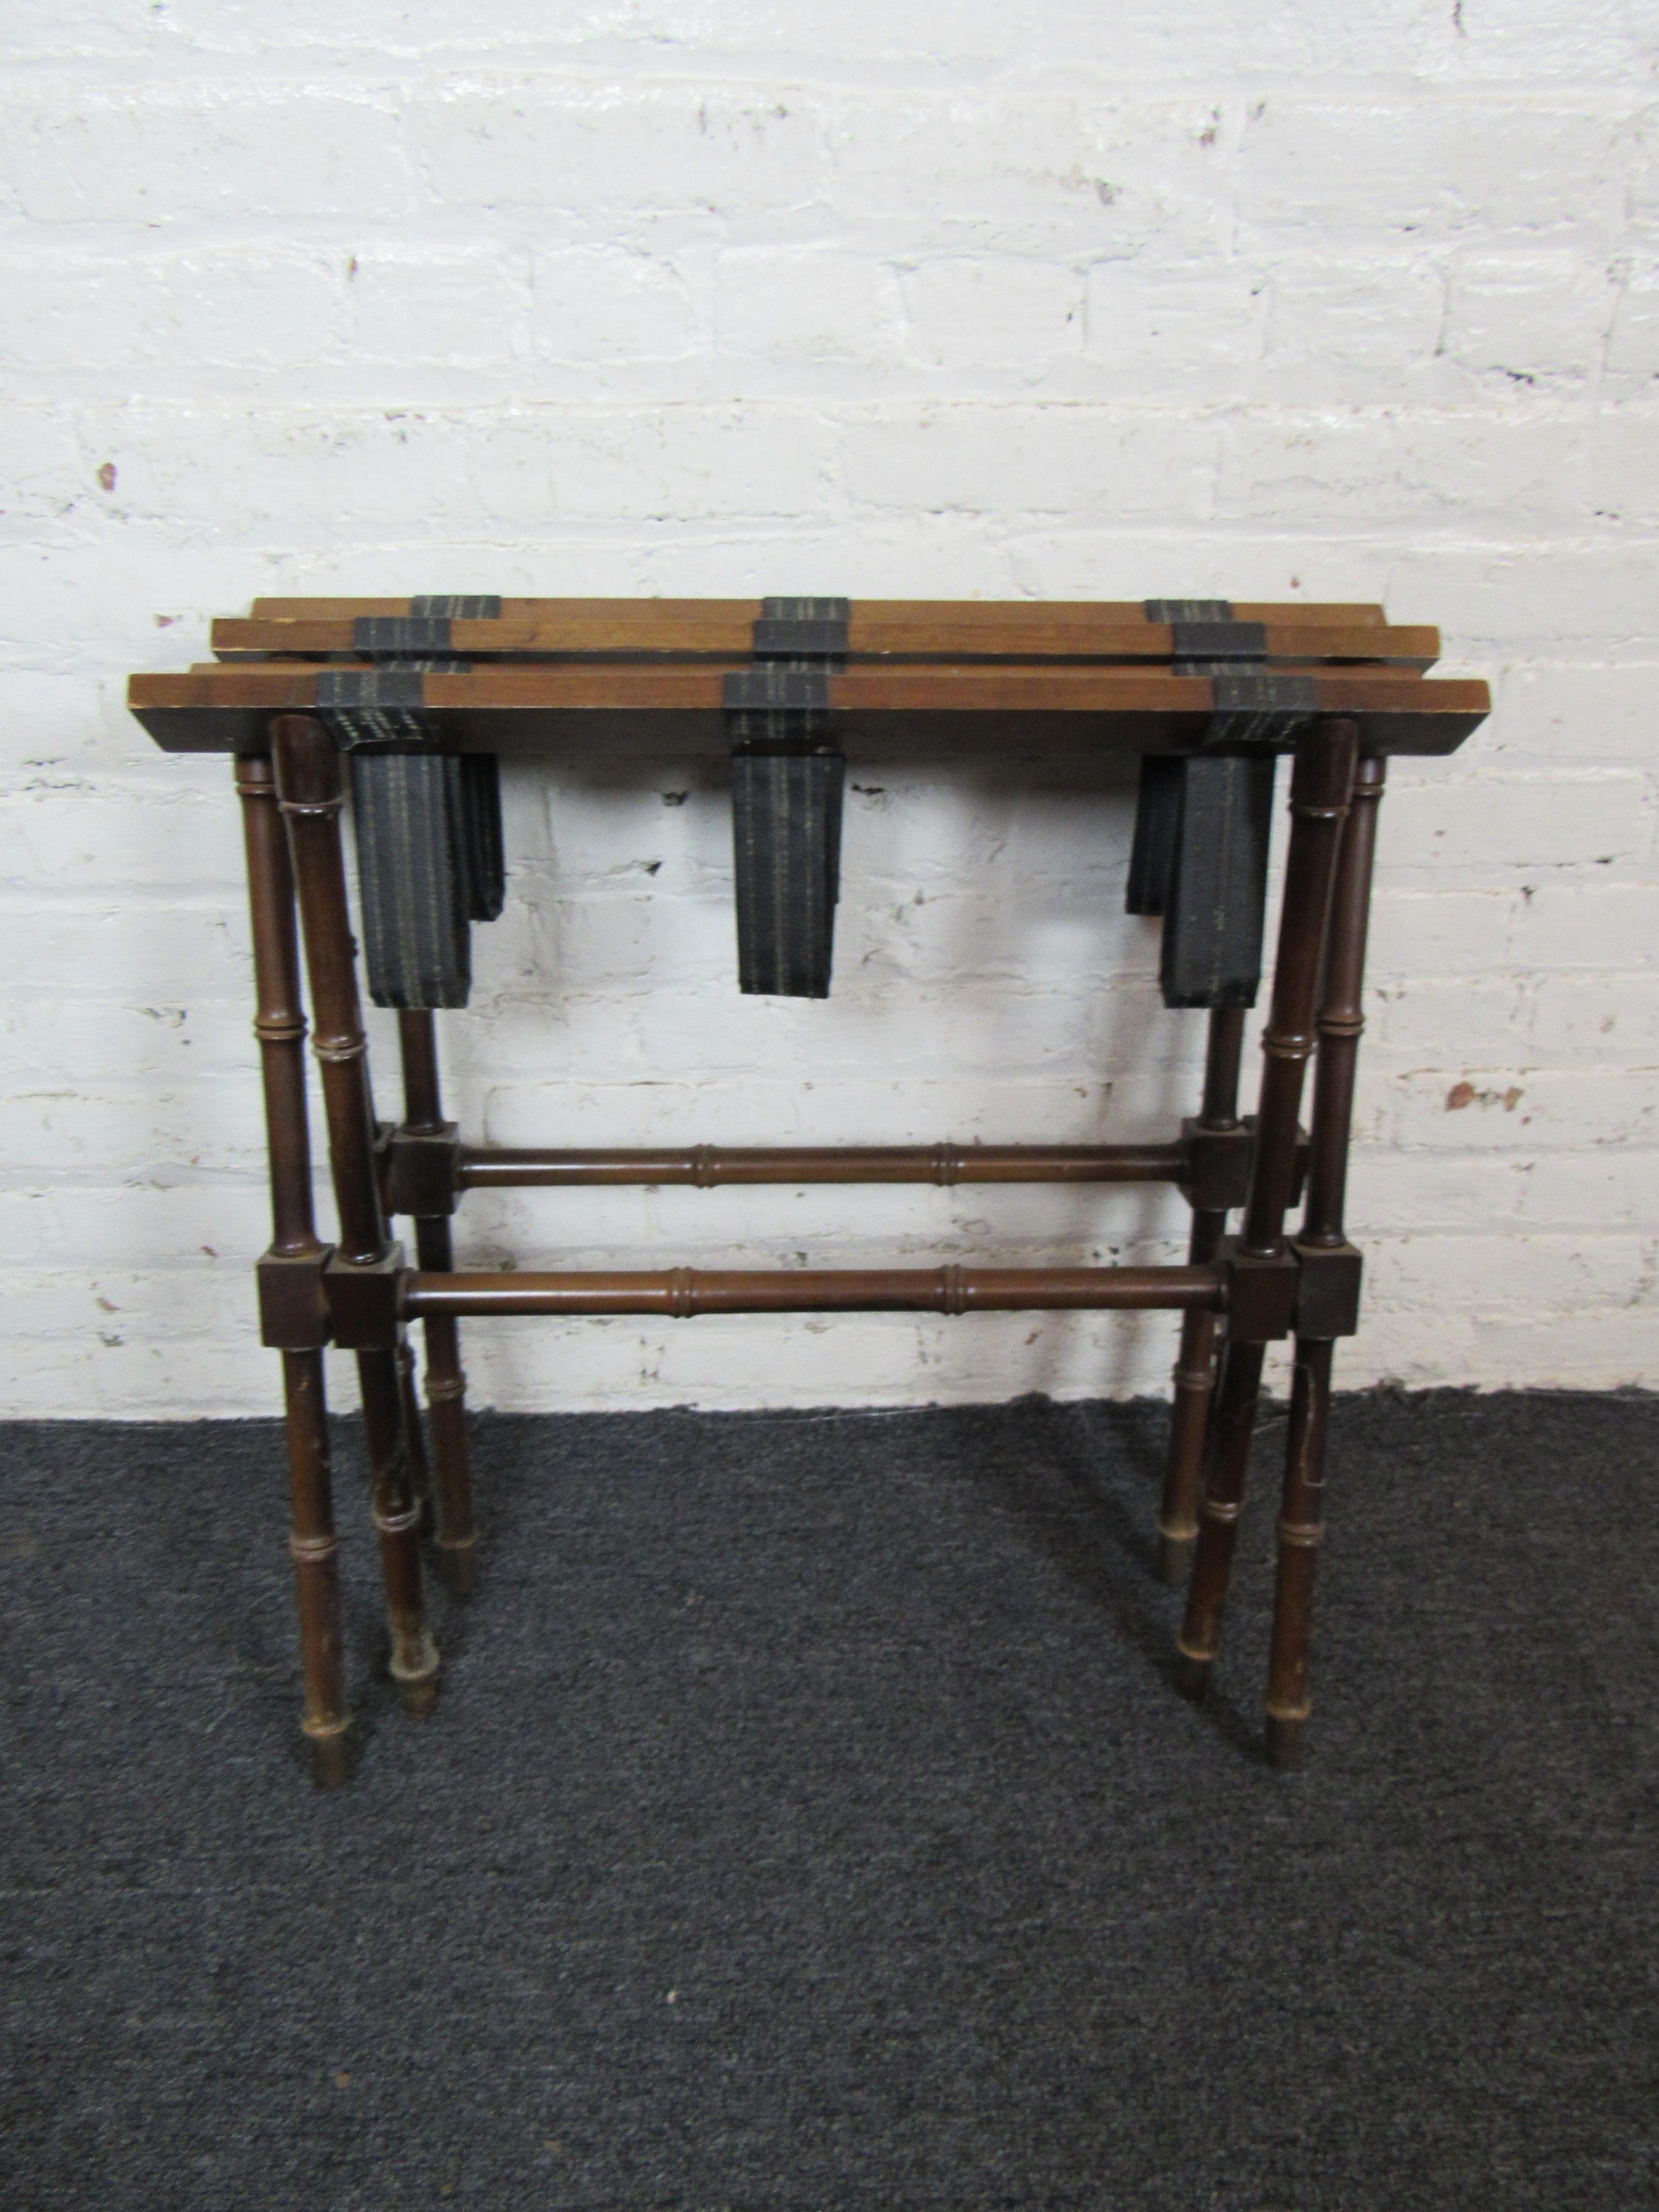 20th Century Hotel Wood and Straps Luggage Racks